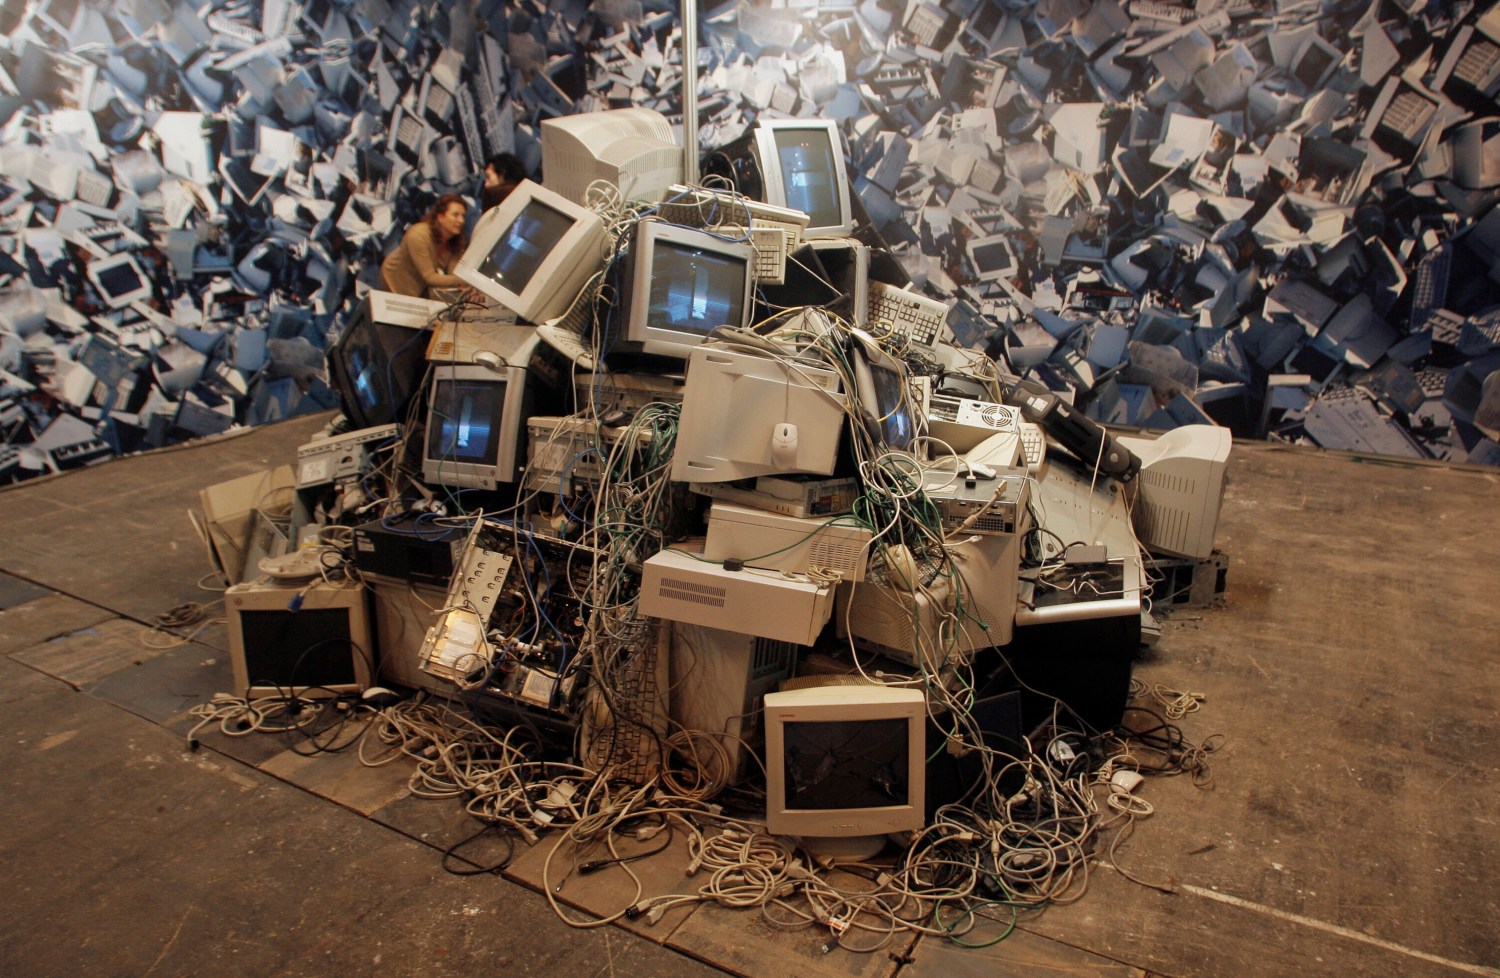 A pile of destroyed desktops and screens are seen in a performance of Spanish Bip-Bip Foundation during the International Telecoms Fair (SIMO) in Madrid November 6, 2007. The foundation is a non-profit organization looking to breach the digital divide between those that have access to new technologies and those that do not.  REUTERS/Sergio Perez  (SPAIN)